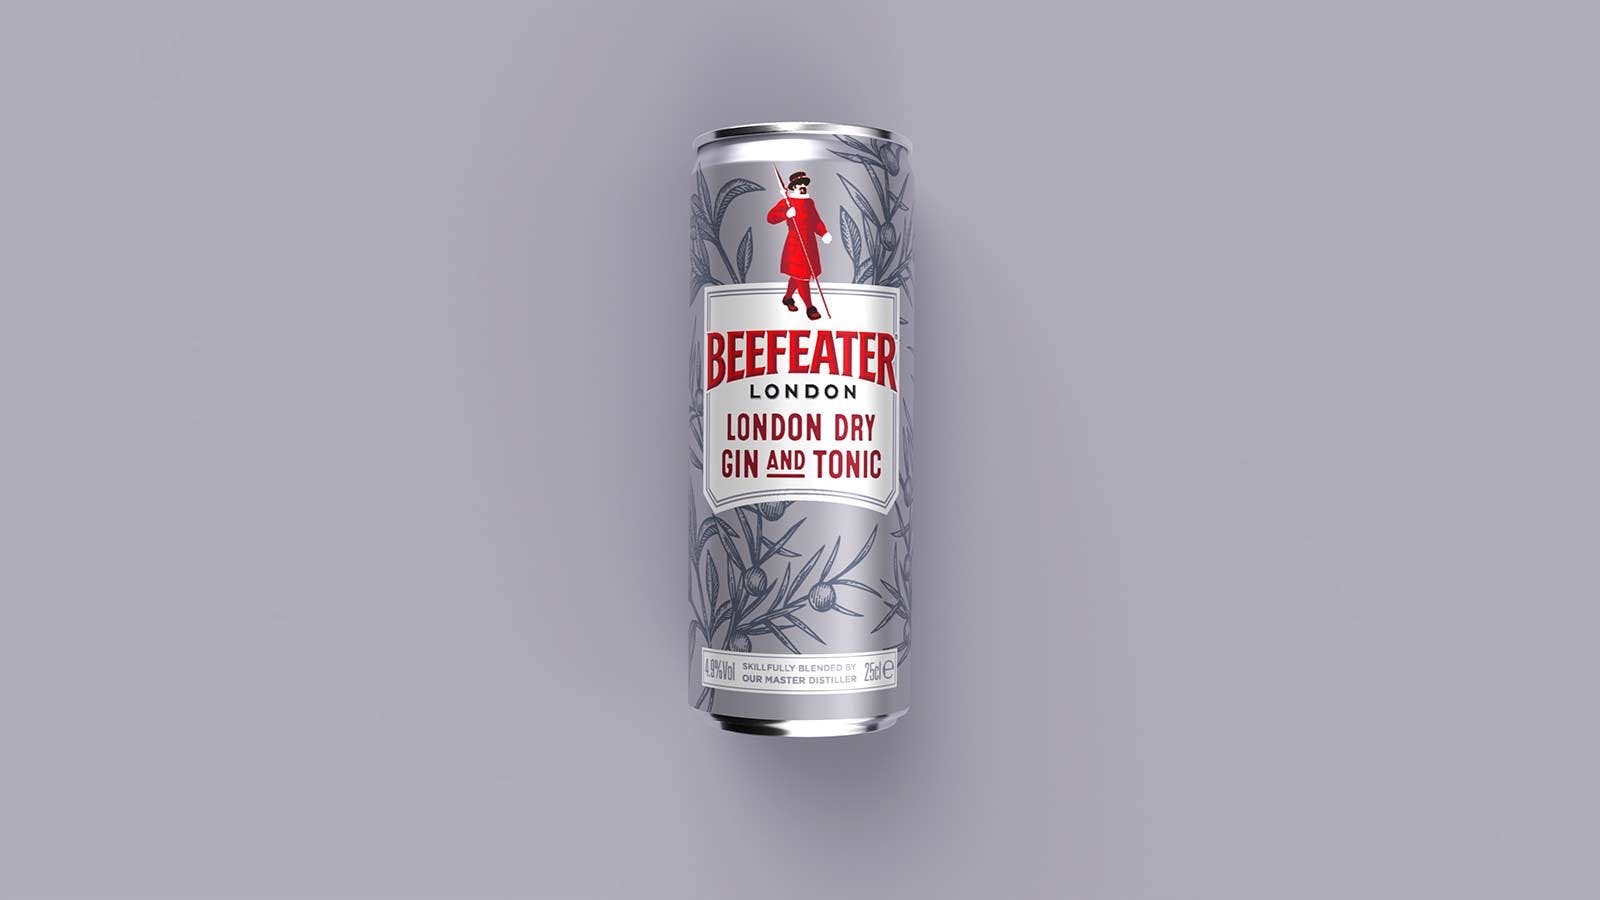 Beefeater can